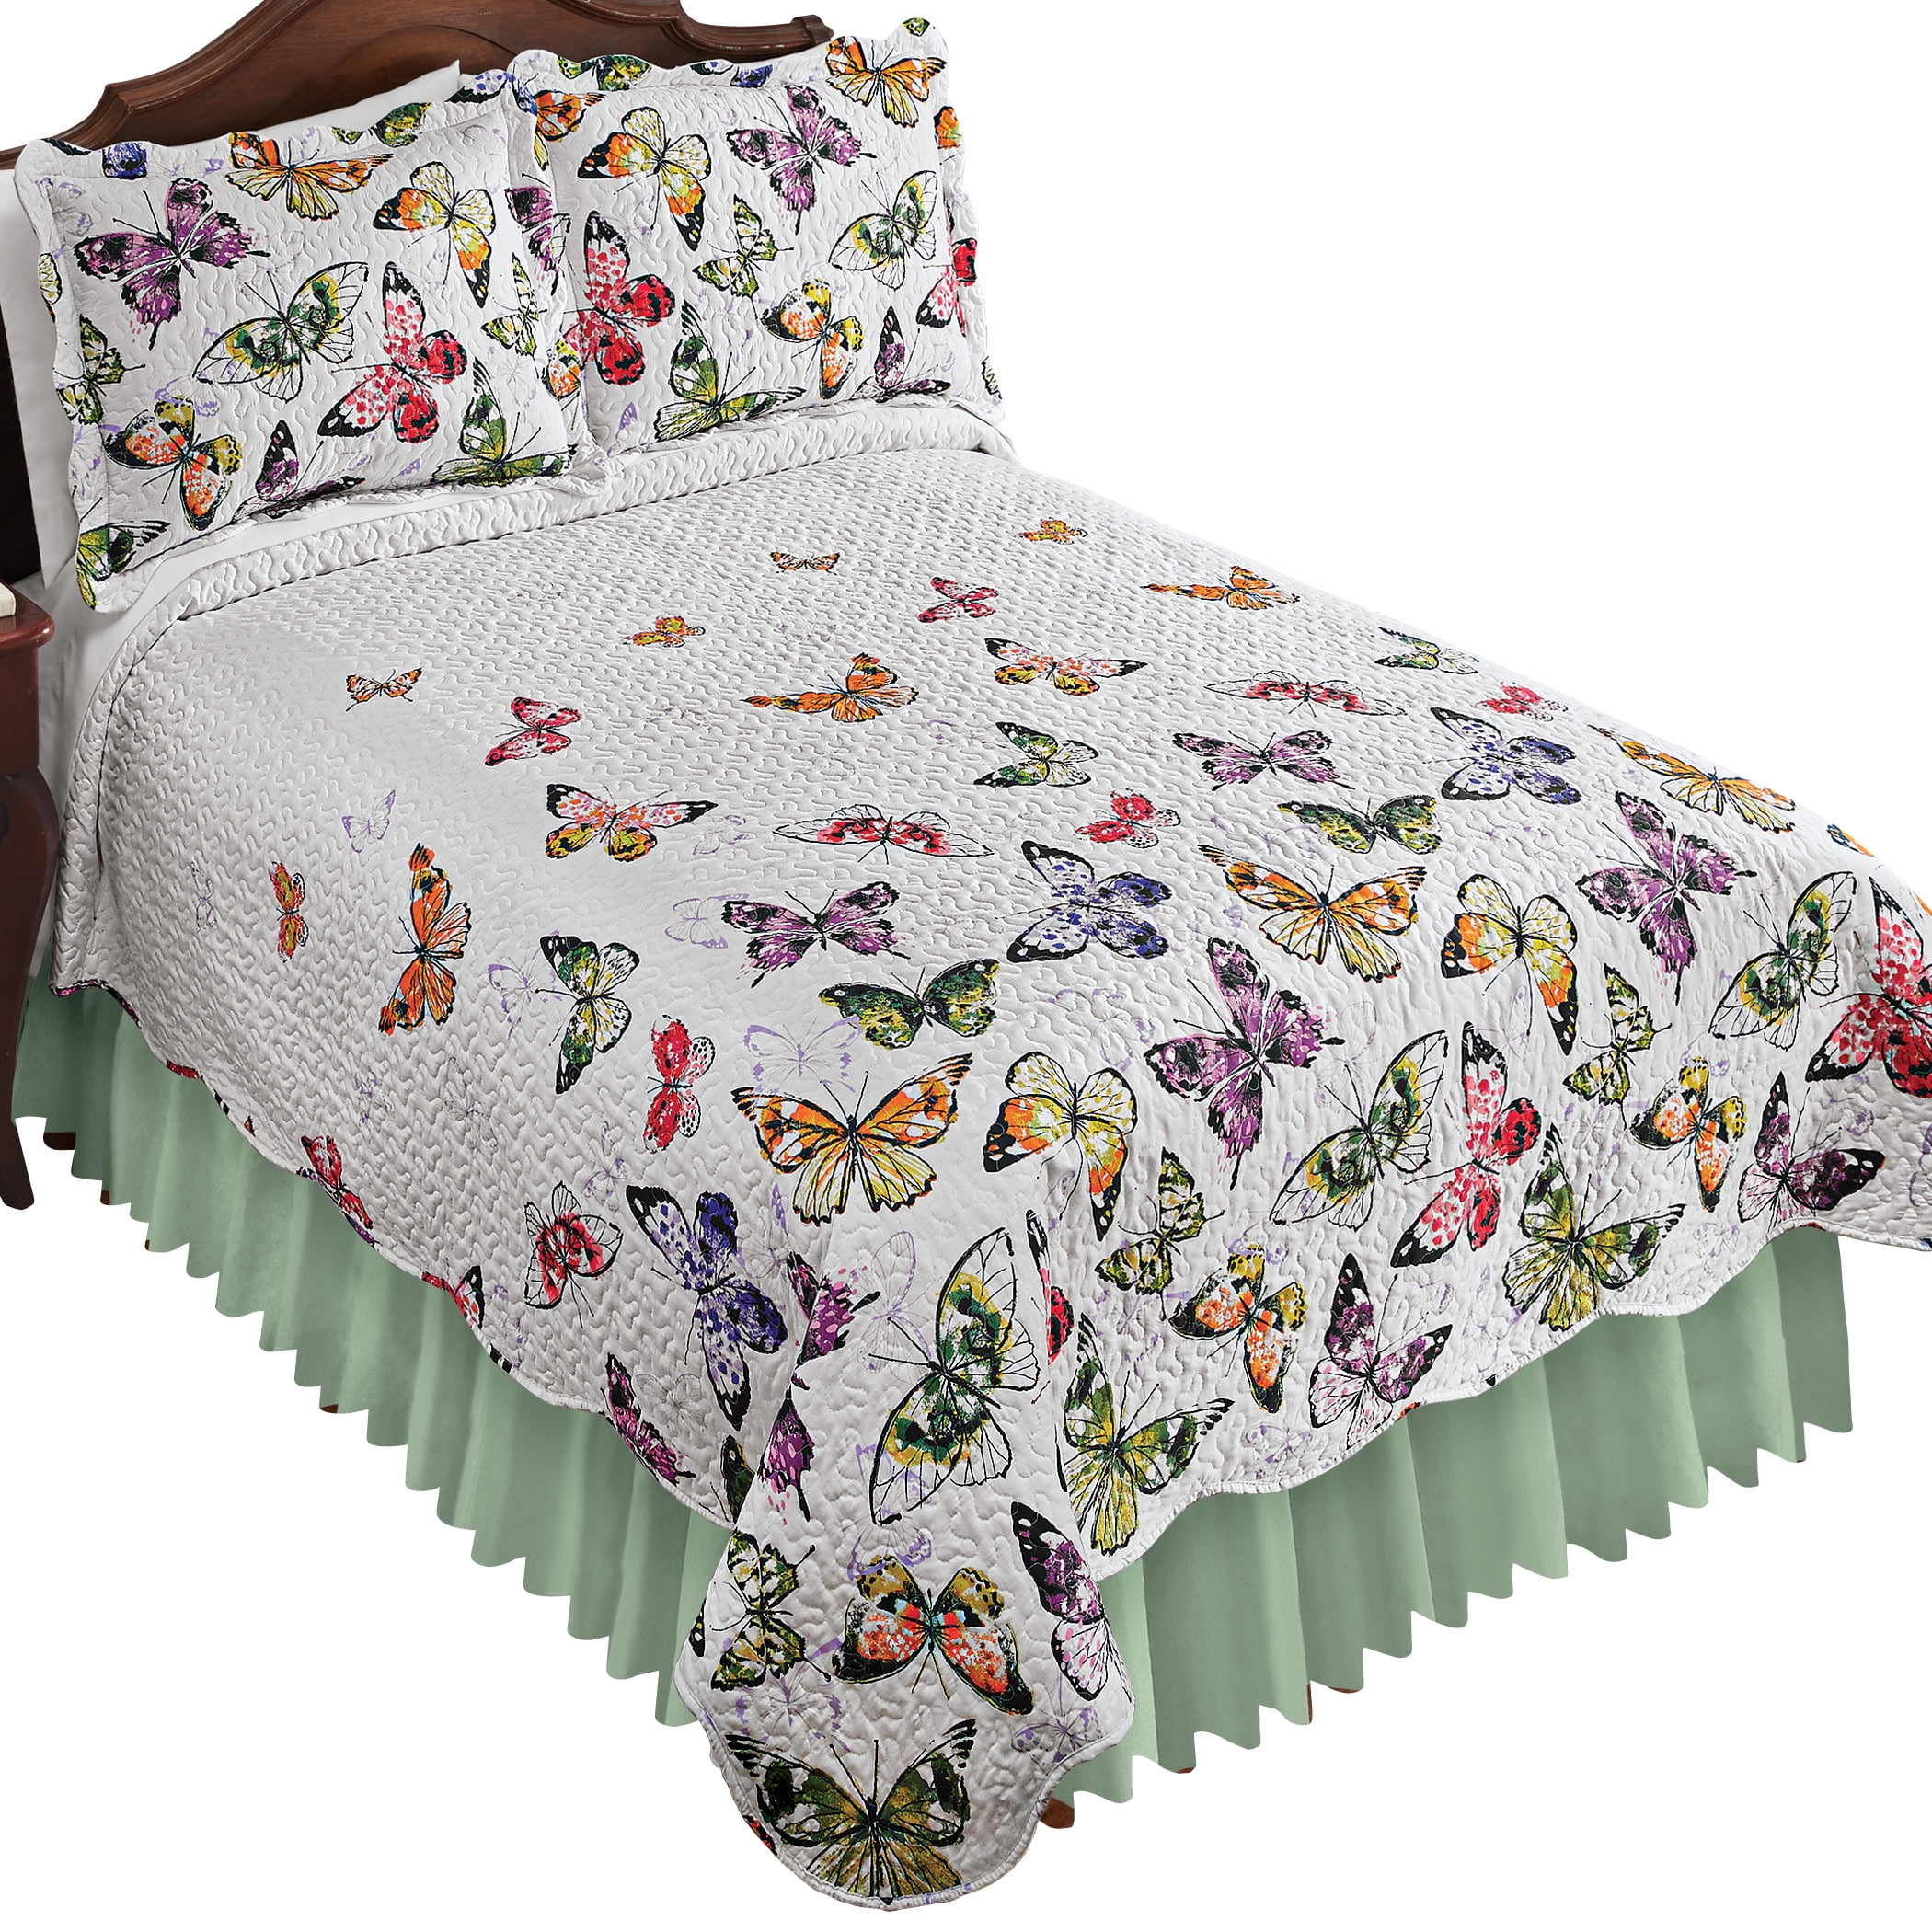 Details about   Pastoral Princess Bedding Set Luxury 4pc Printing Ruffles Duvet Cover Bed Skirt